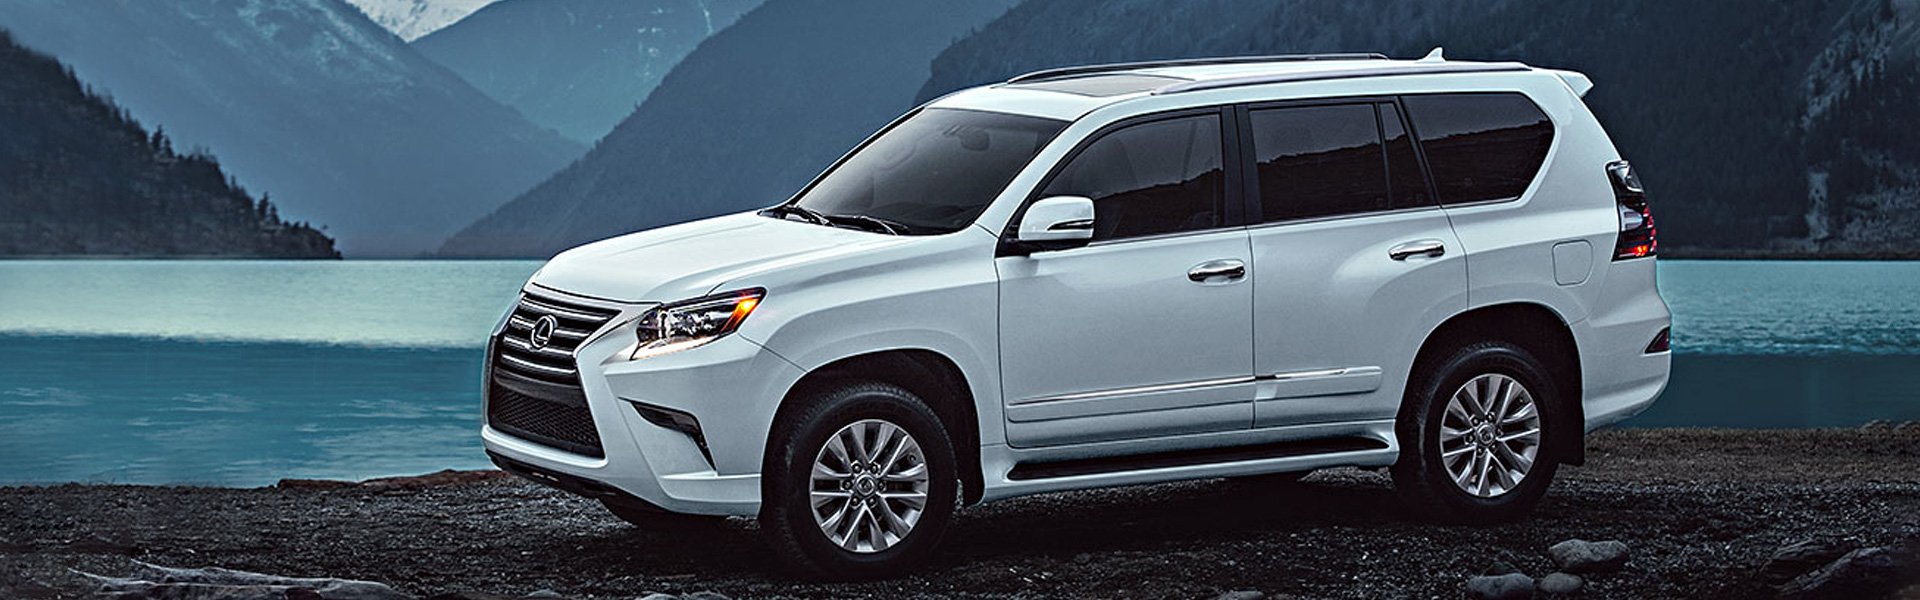 2017 Lexus GX 460 Available Trims in Orland Park, IL